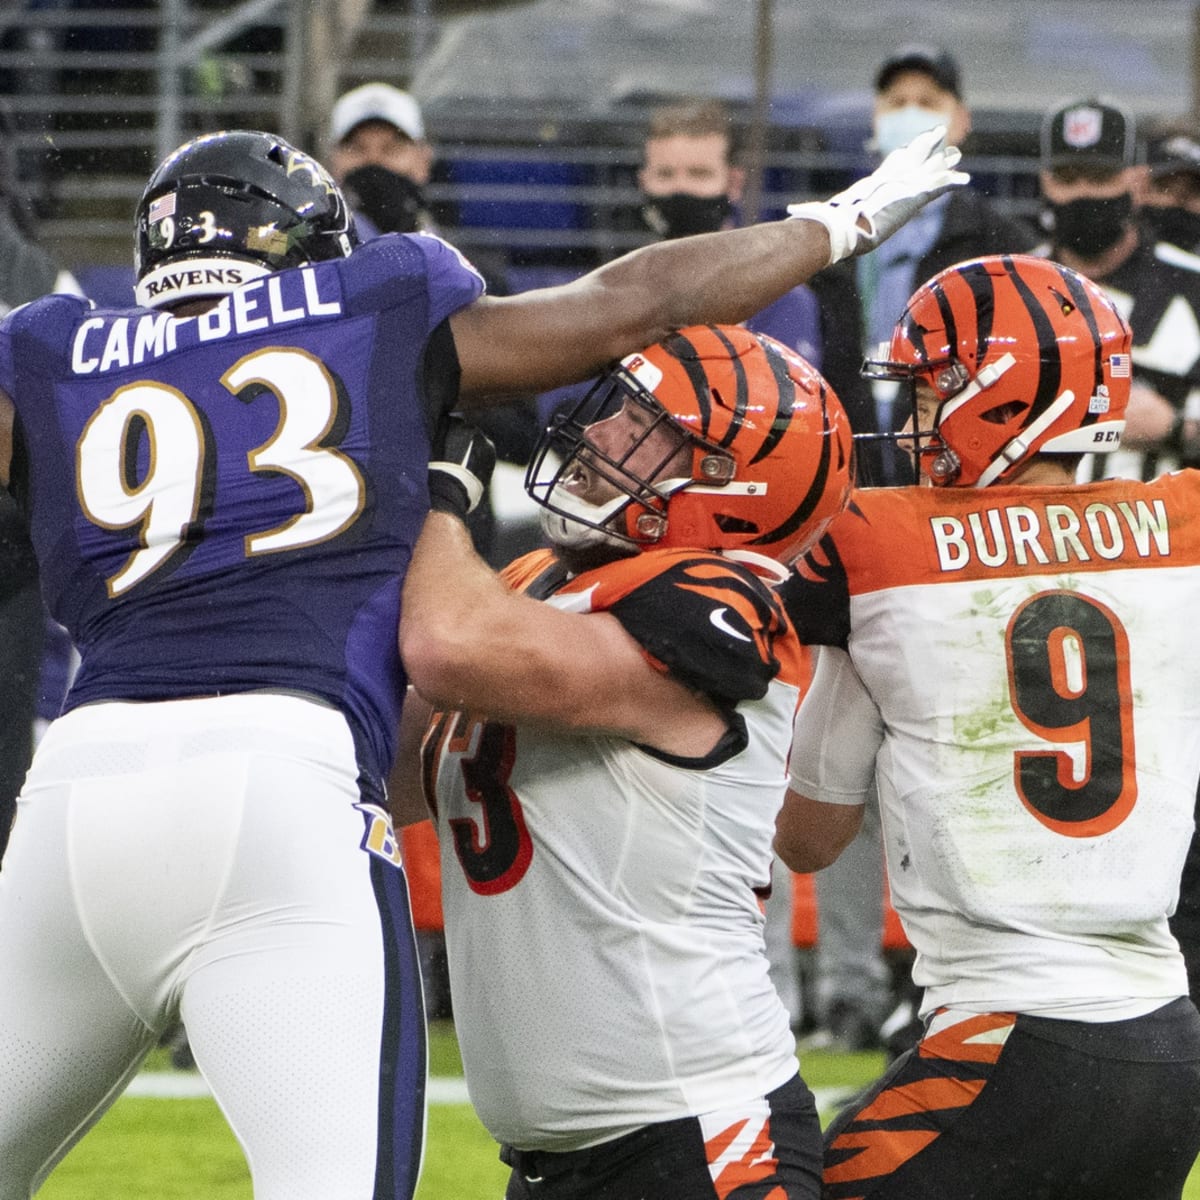 bengals offensive line ranking